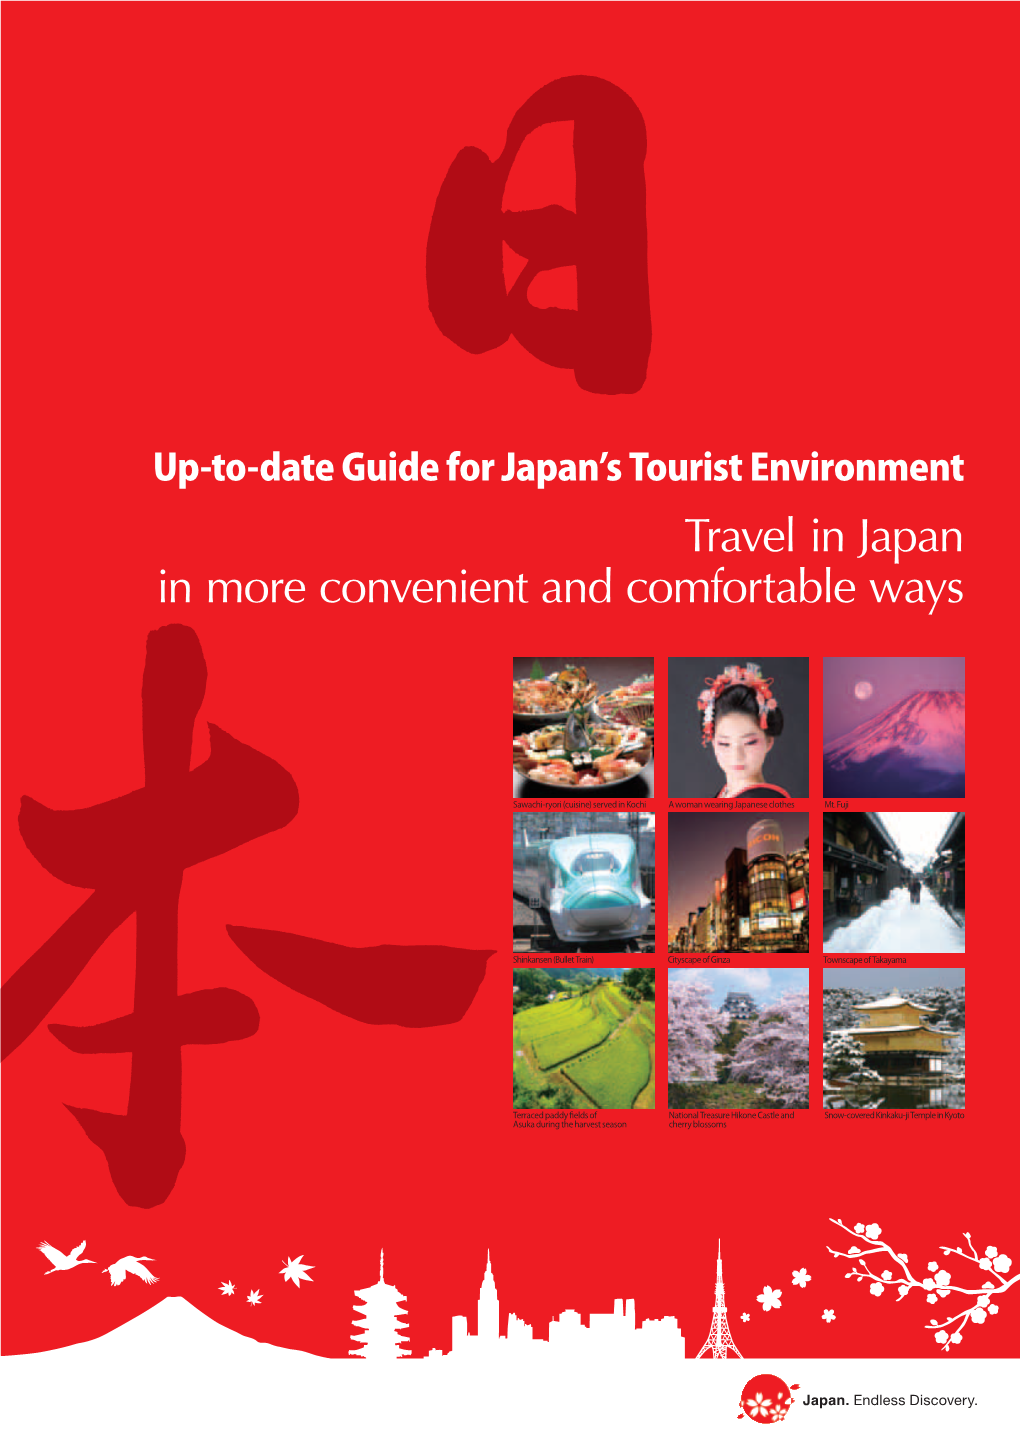 Travel in Japan in More Convenient and Comfortable Ways